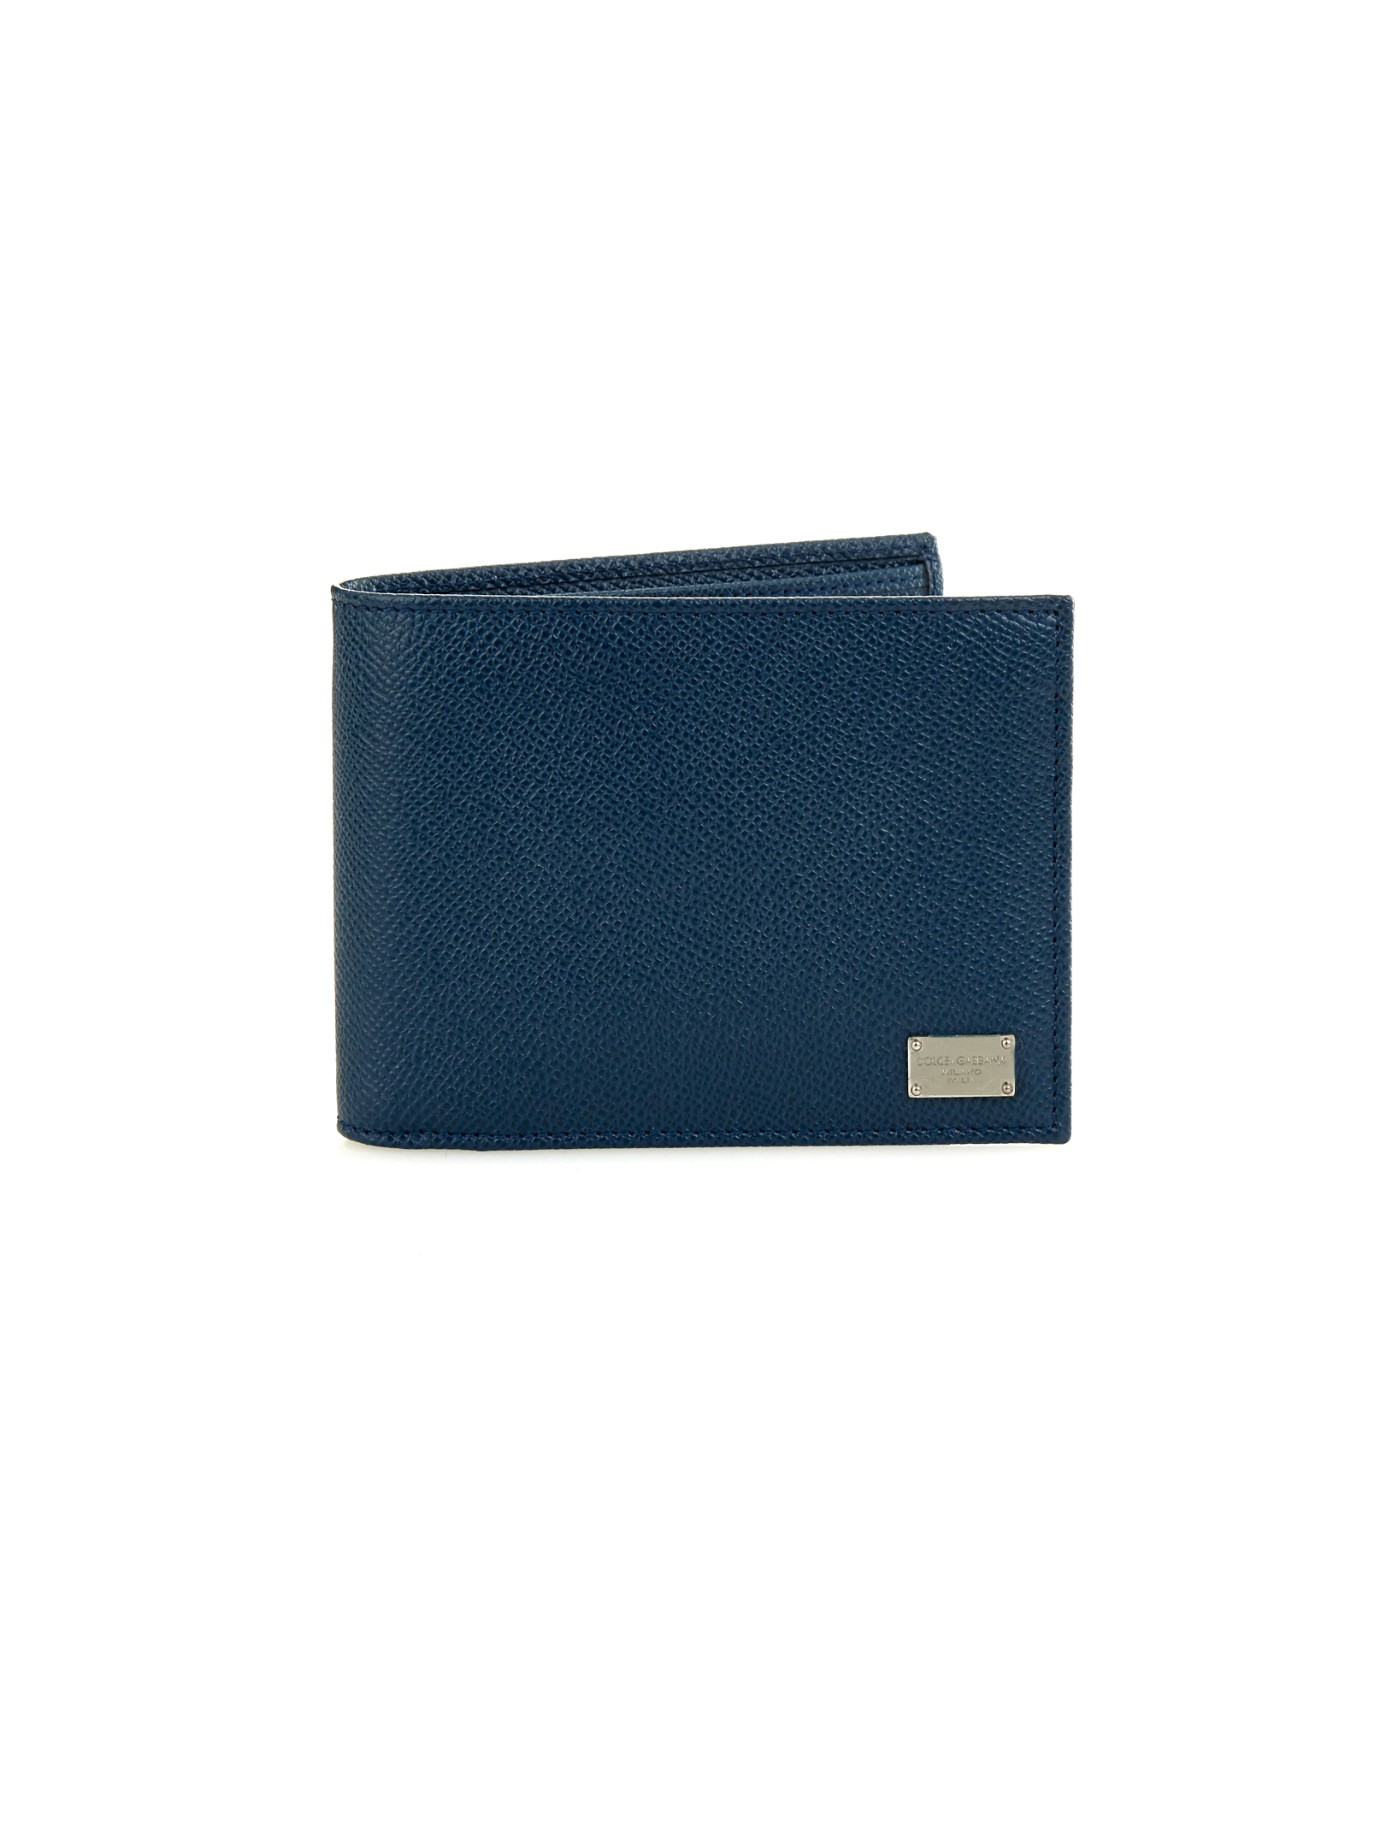 Dolce & Gabbana Grained-leather Wallet in Blue for Men | Lyst